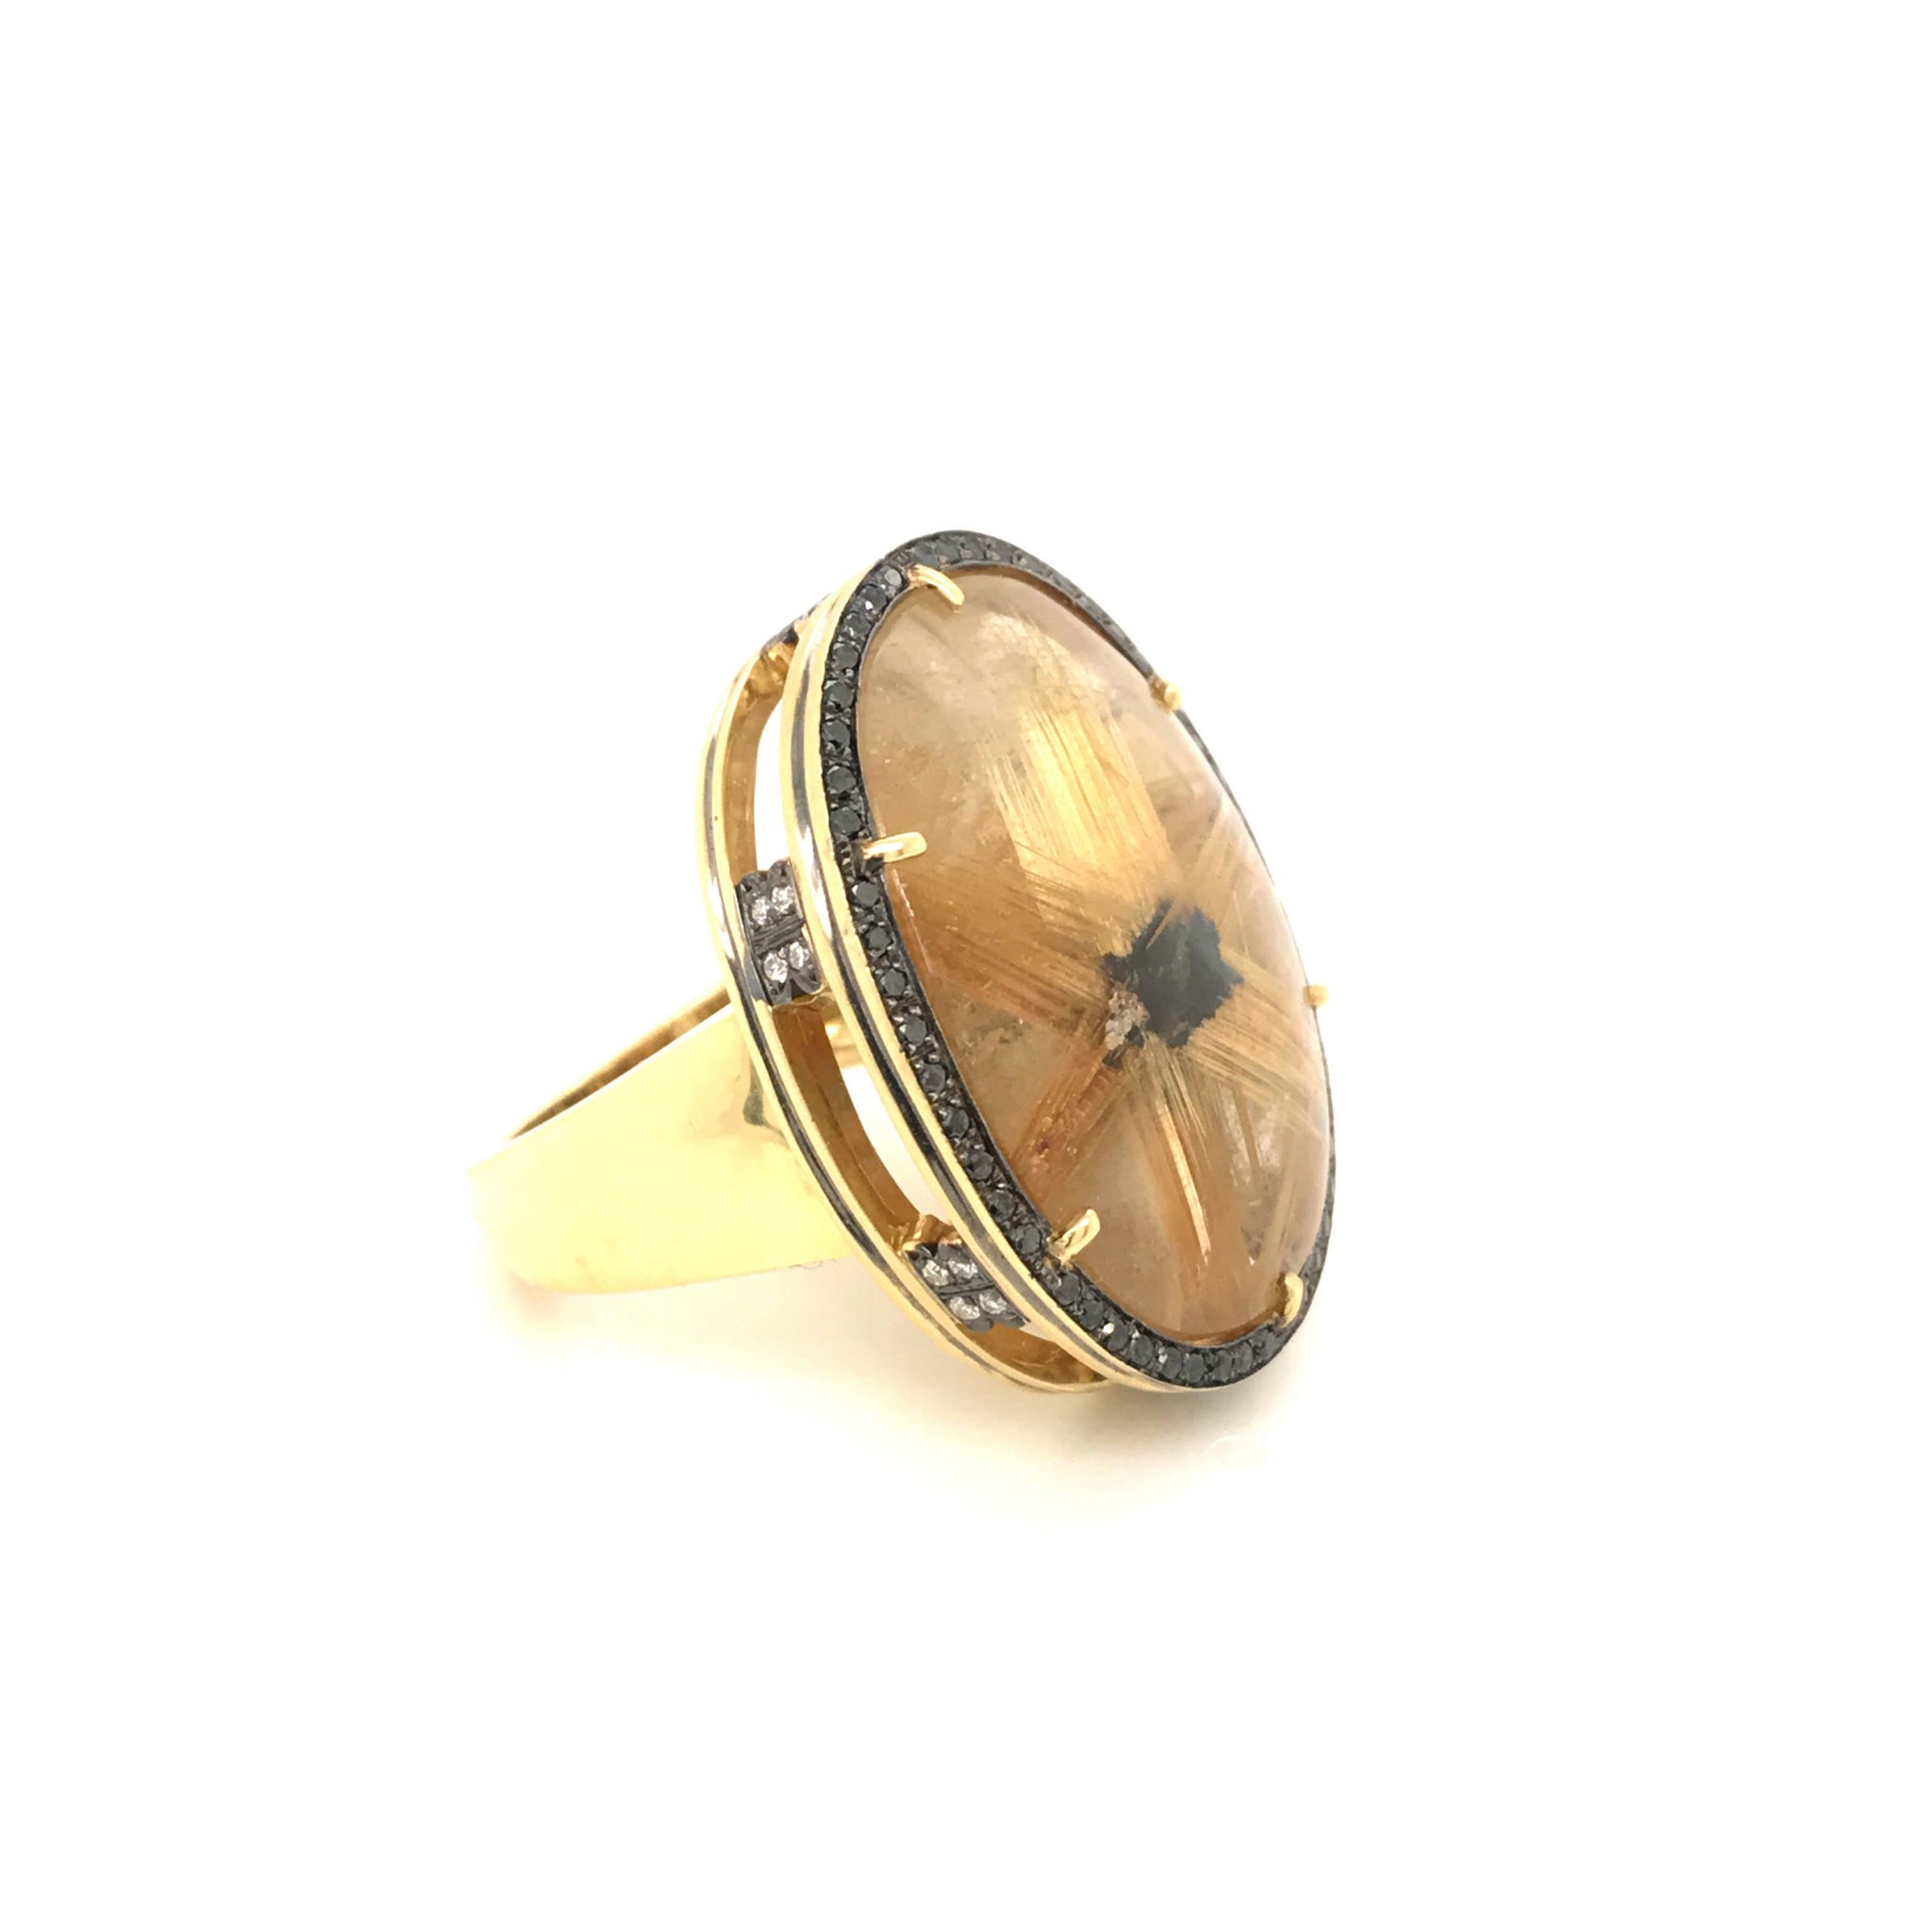 One-of-a-kind 18kt Green Gold Ribbon Quartz Cocktail Ring